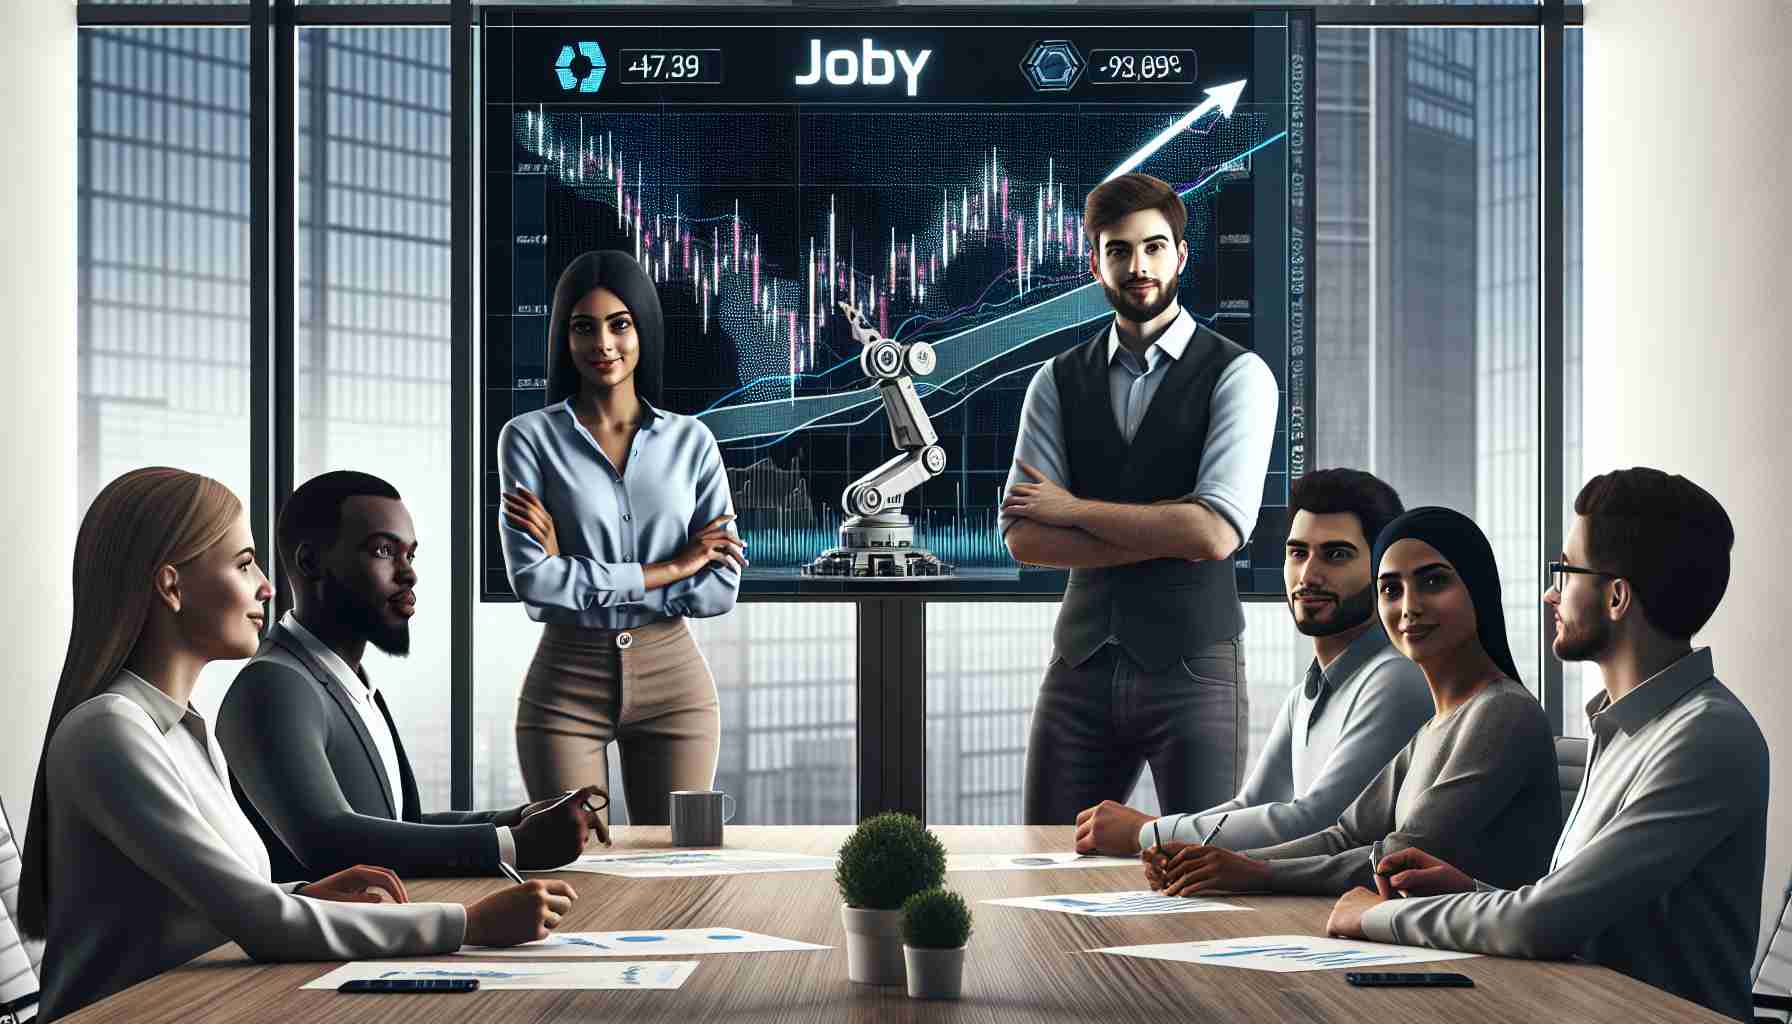 Realistic high-definition image of a business meeting in a modern office where diverse group of investors composed of a middle-eastern woman, a black man, a caucasian man and a south asian woman are expressing their confidence. They're studying charts displaying steady stock performance, projected onto a large screen. The company logo for a fictional robotics startup 'Joby Technologies' is prominently displayed on the screen. The setting conveys a sense of optimism and confidence in the company's future.